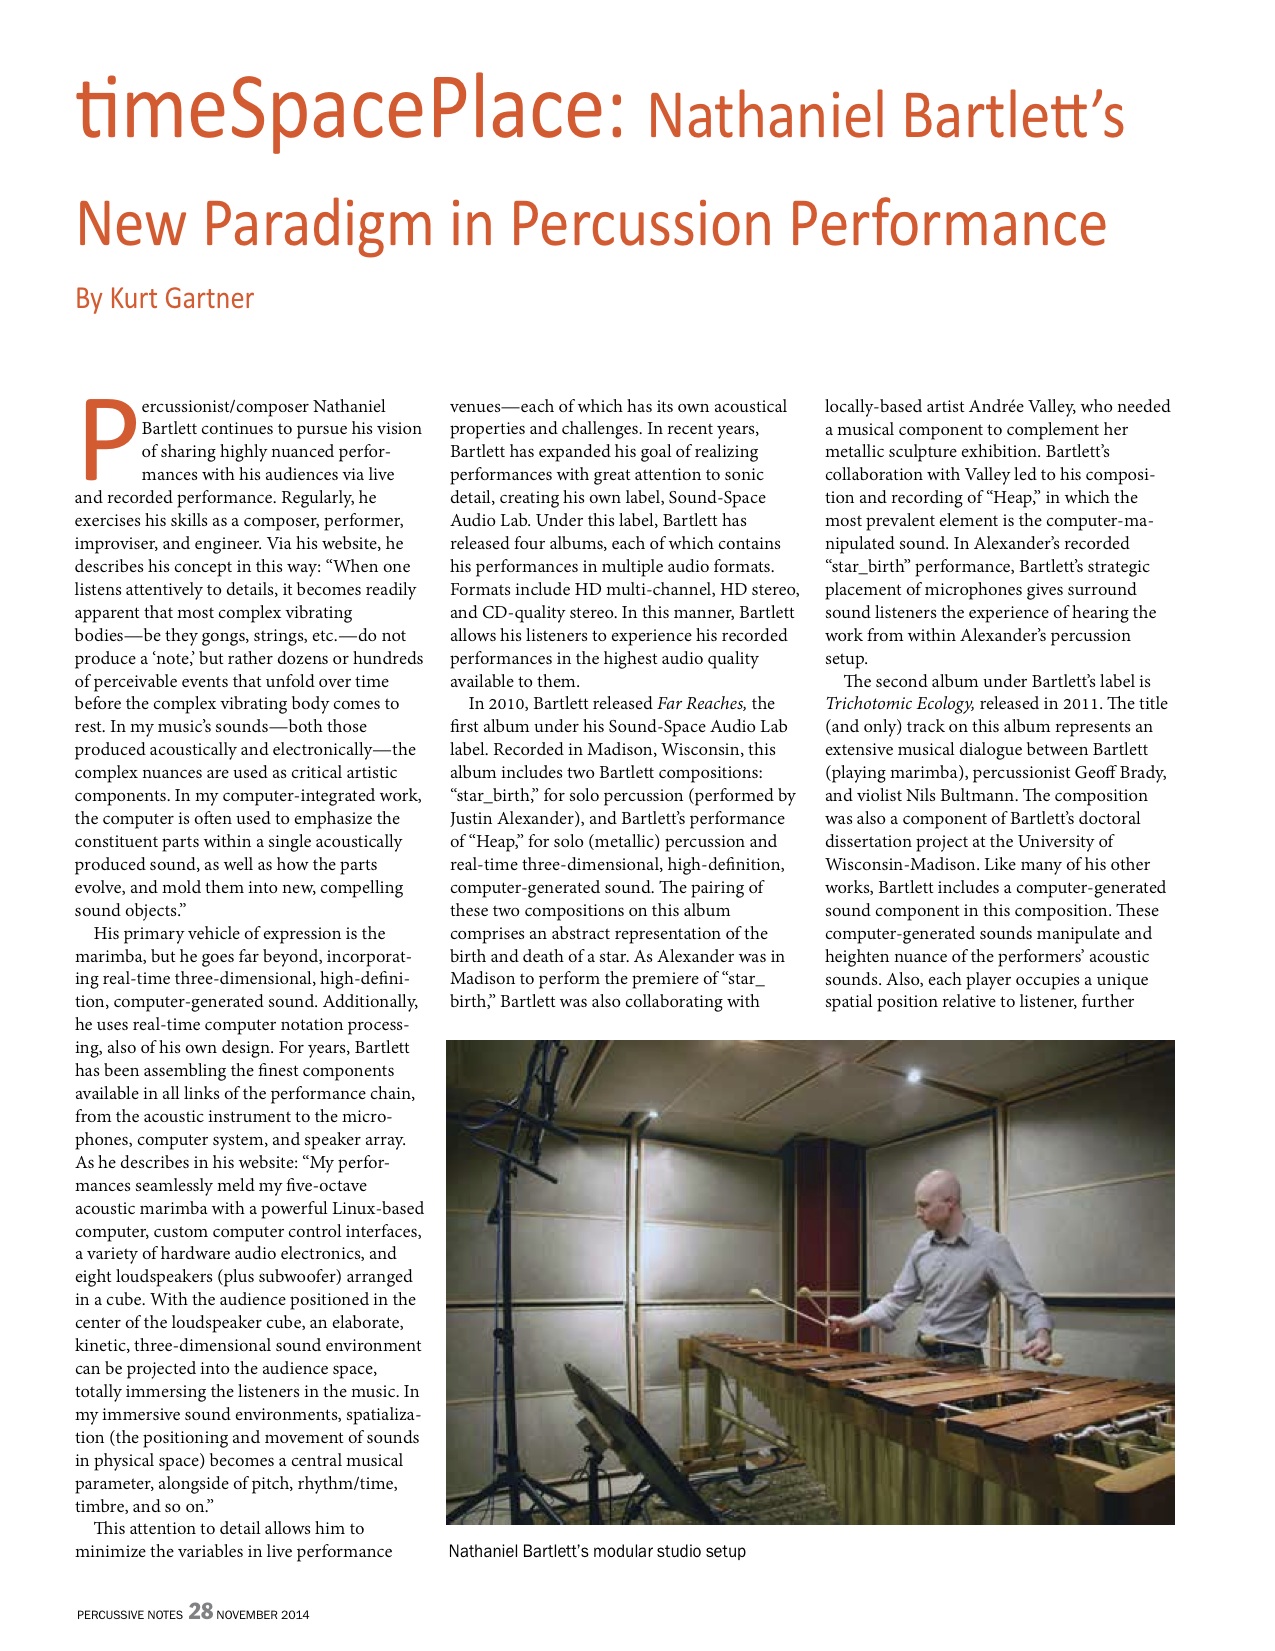 timeSpacePlace: Nathaniel Bartlett's New Paradigm in Percussion Performance